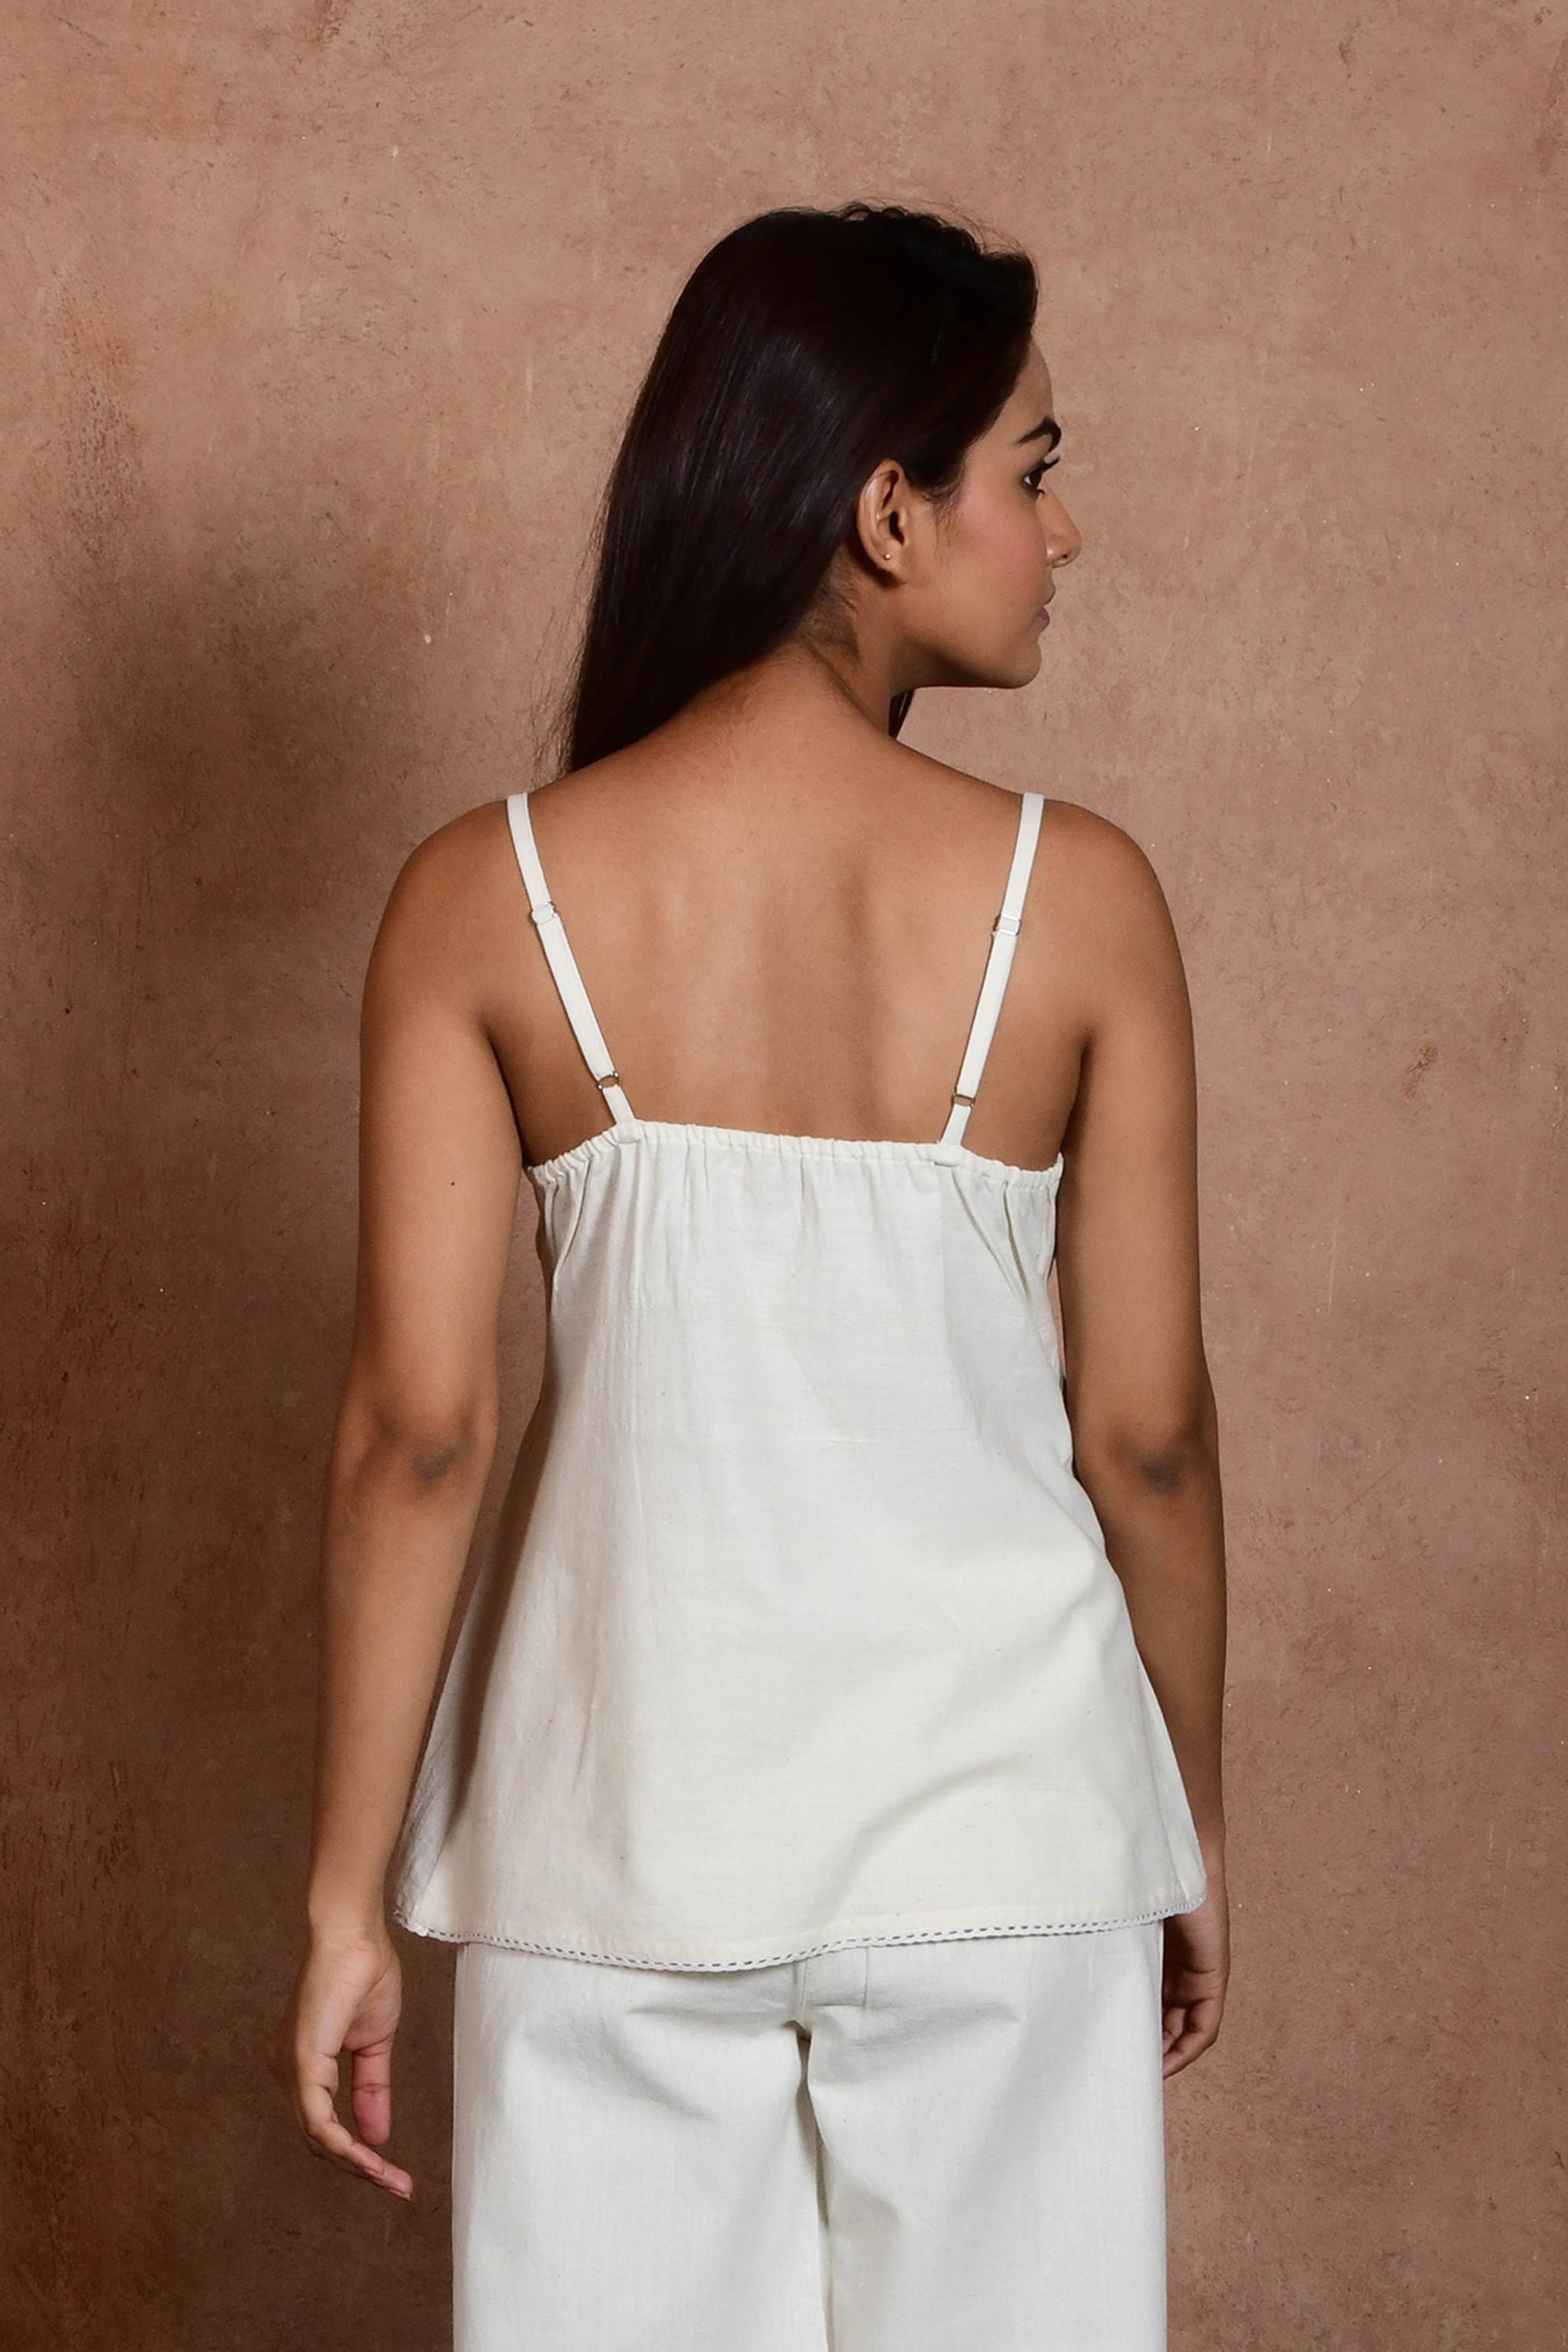 Back pose of an indian model wearing an off white spaghetti top with pin tucks.